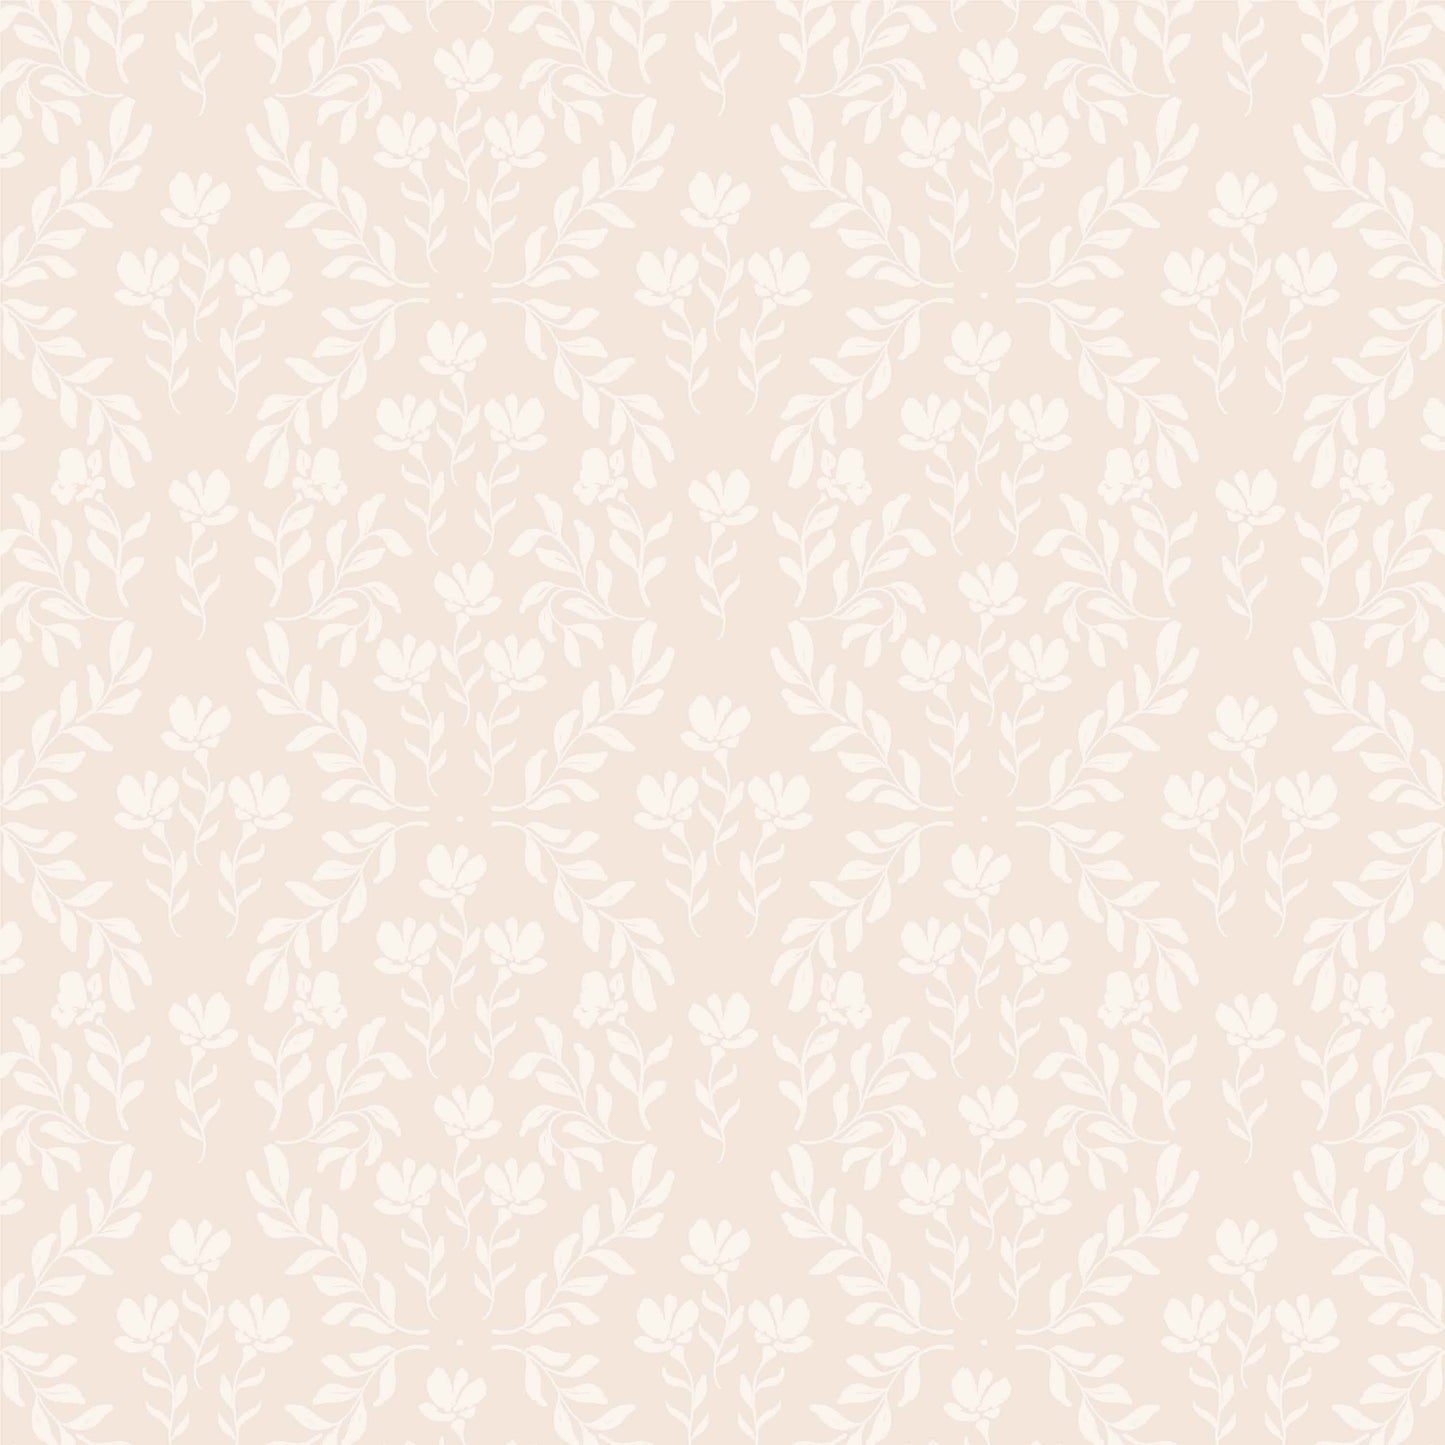 Indulge in the delicate beauty of our Renaissance Revival Wallpaper. Its soft blush tones and intricate floral design exude elegance and sophistication, adding a touch of luxury to any room.